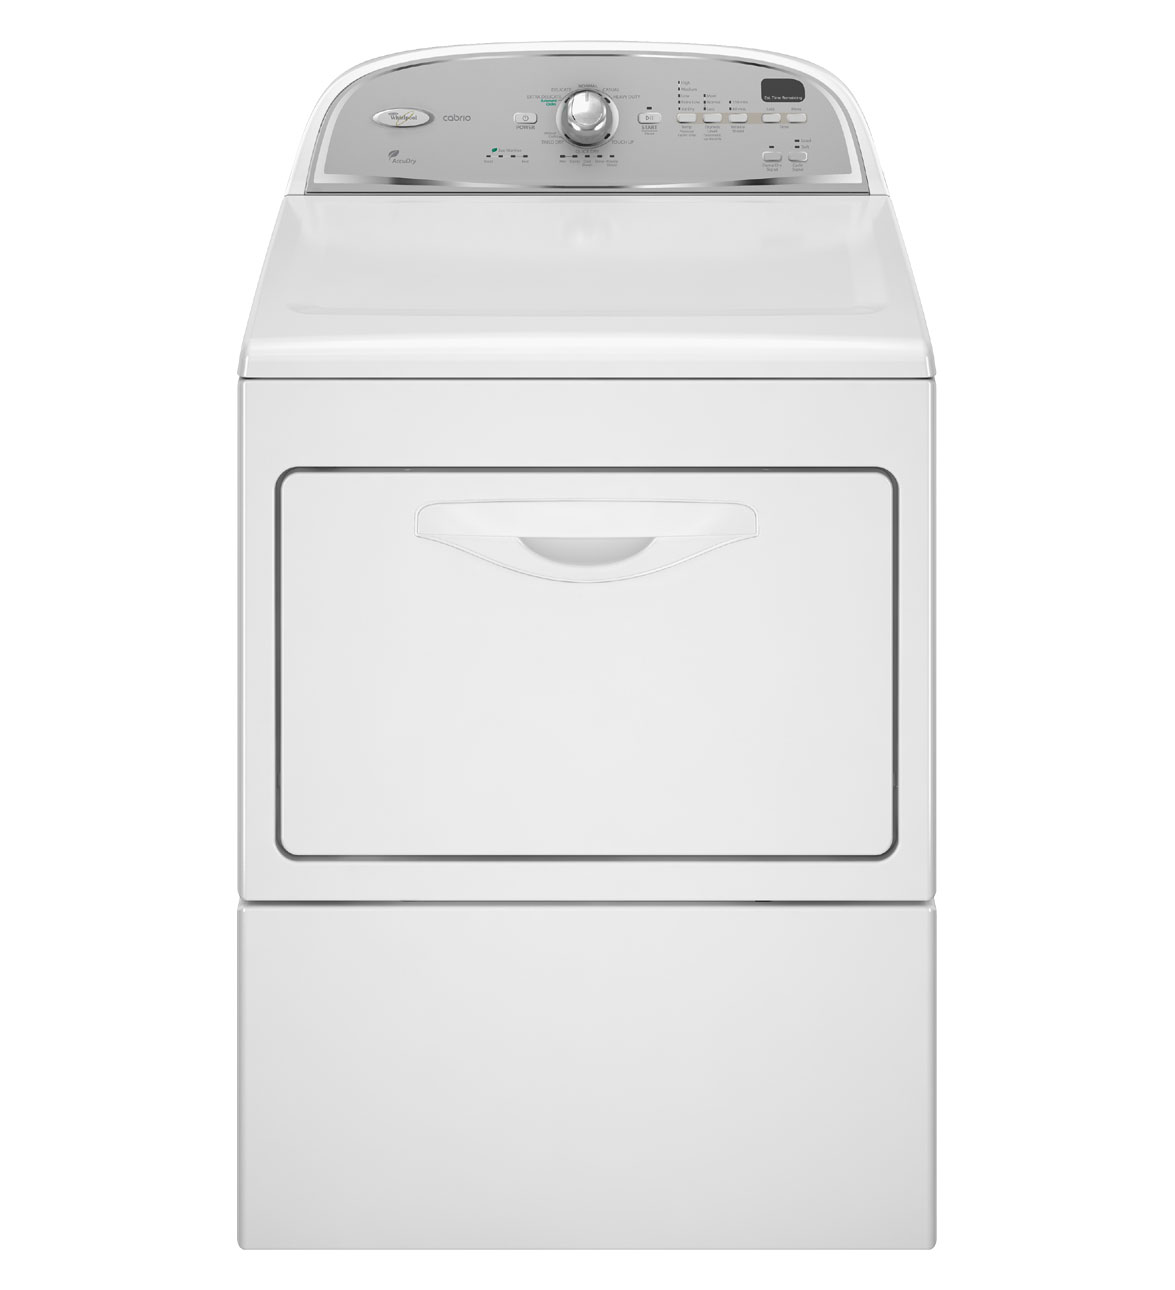 Review of Whirlpool Cabrio 7.4 cu. ft. Electric Dryer in White (Model: WED5600XW)